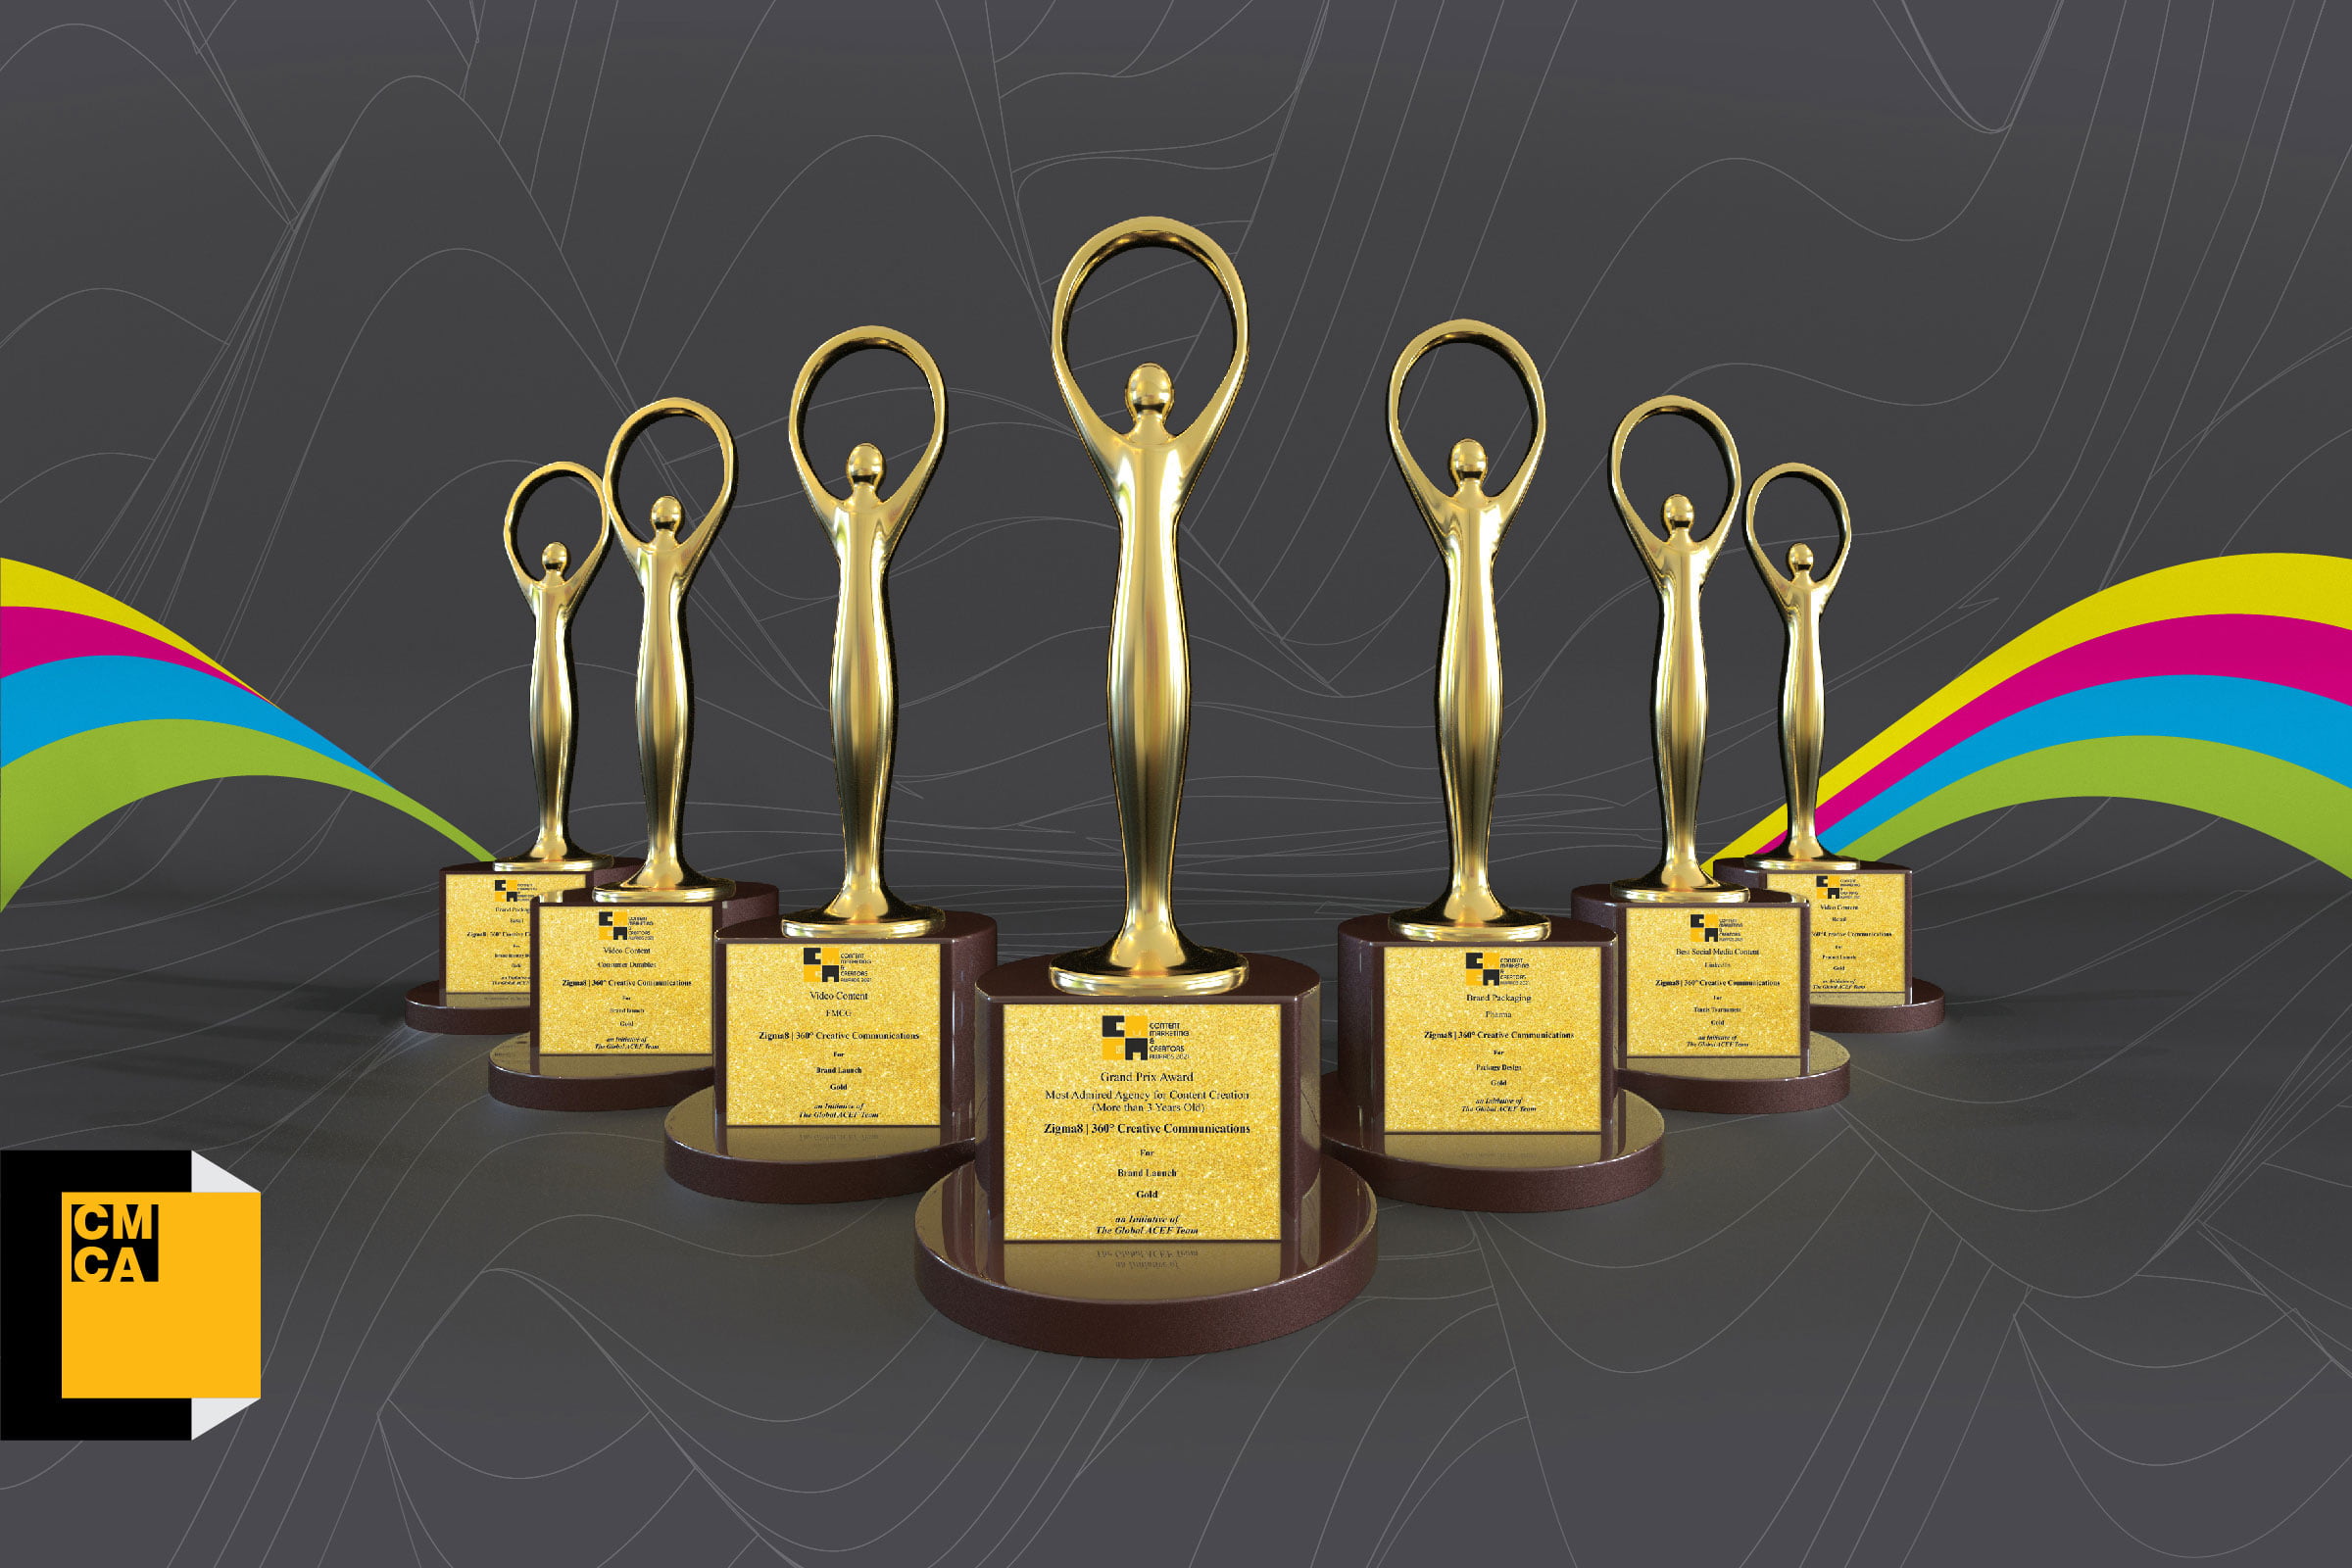 Zigma8 won a total of 7 gold awards at the Content Marketing Creators Awards 2021 (CMCA)